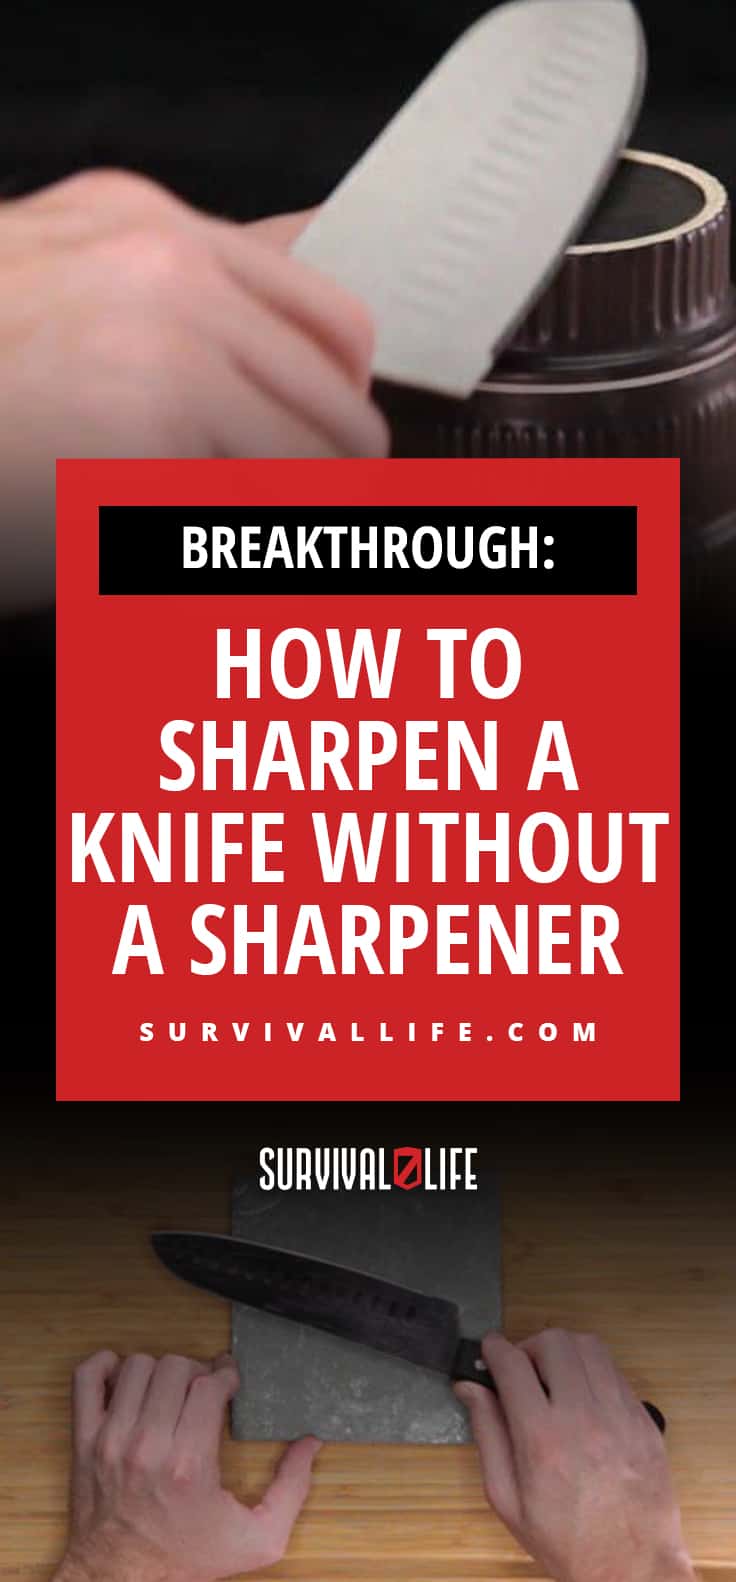 Breakthrough: How to Sharpen a Knife Without a Sharpener